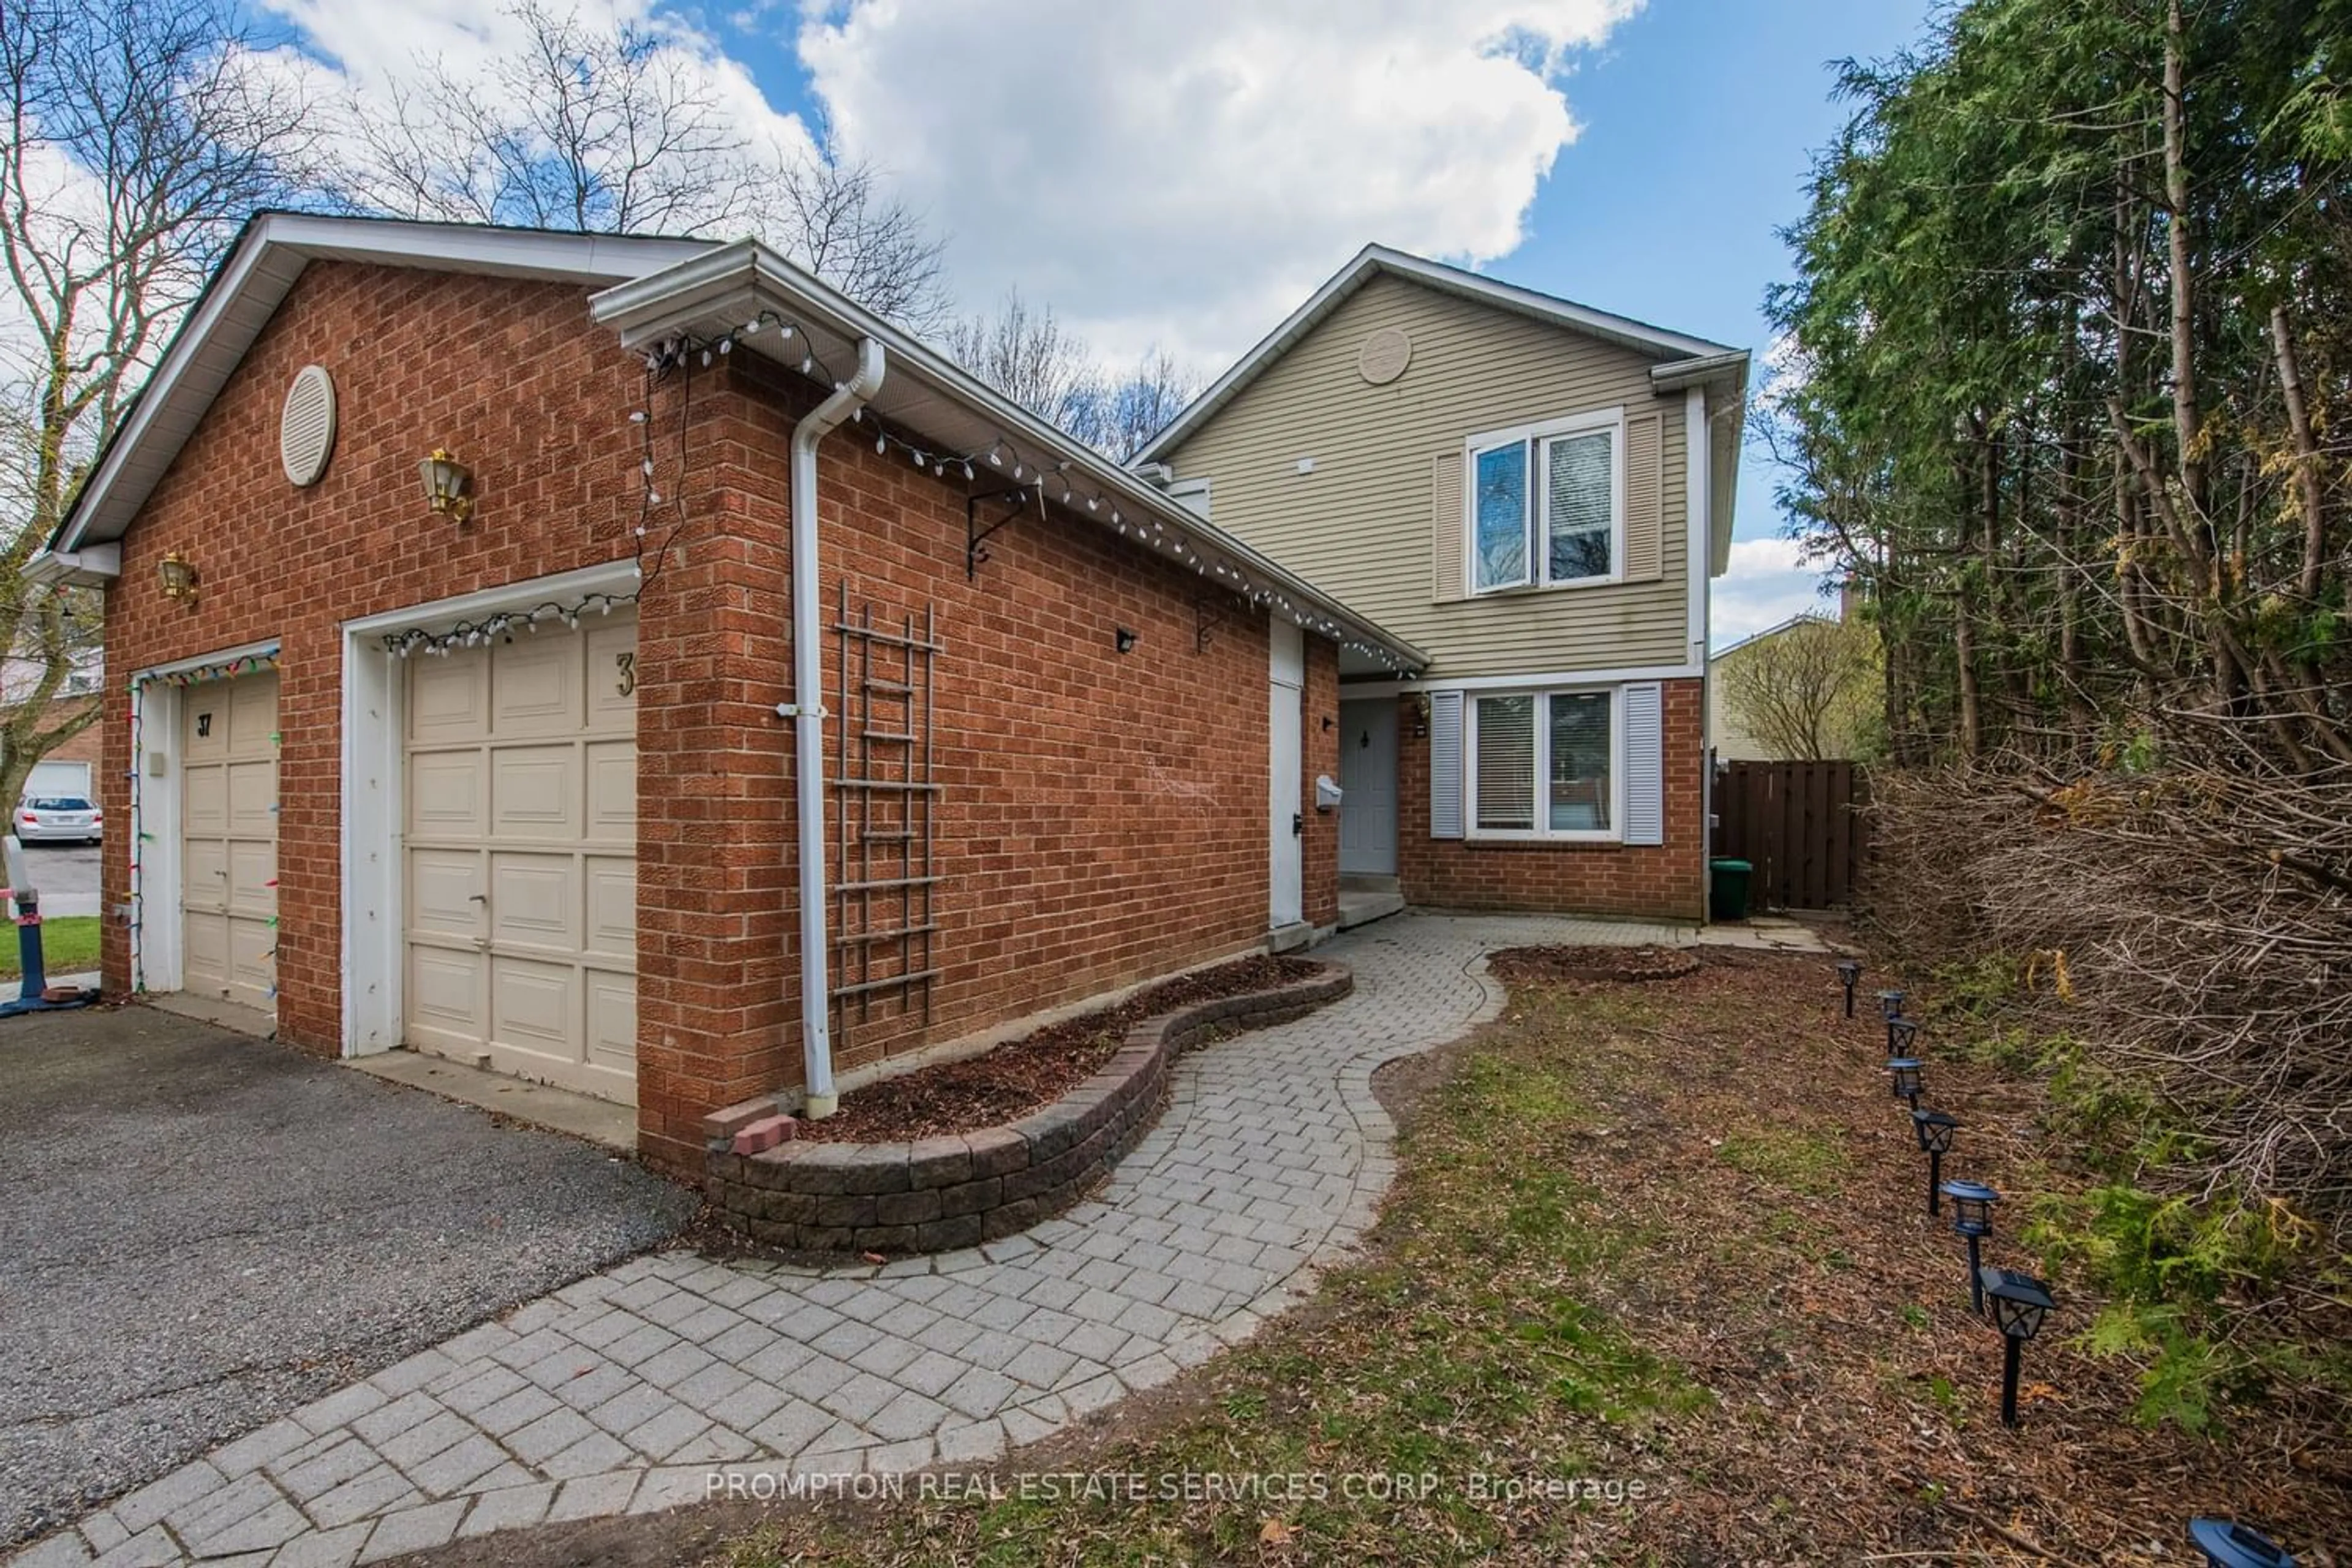 Home with brick exterior material for 39 Frost Dr, Whitby Ontario L1P 1C8